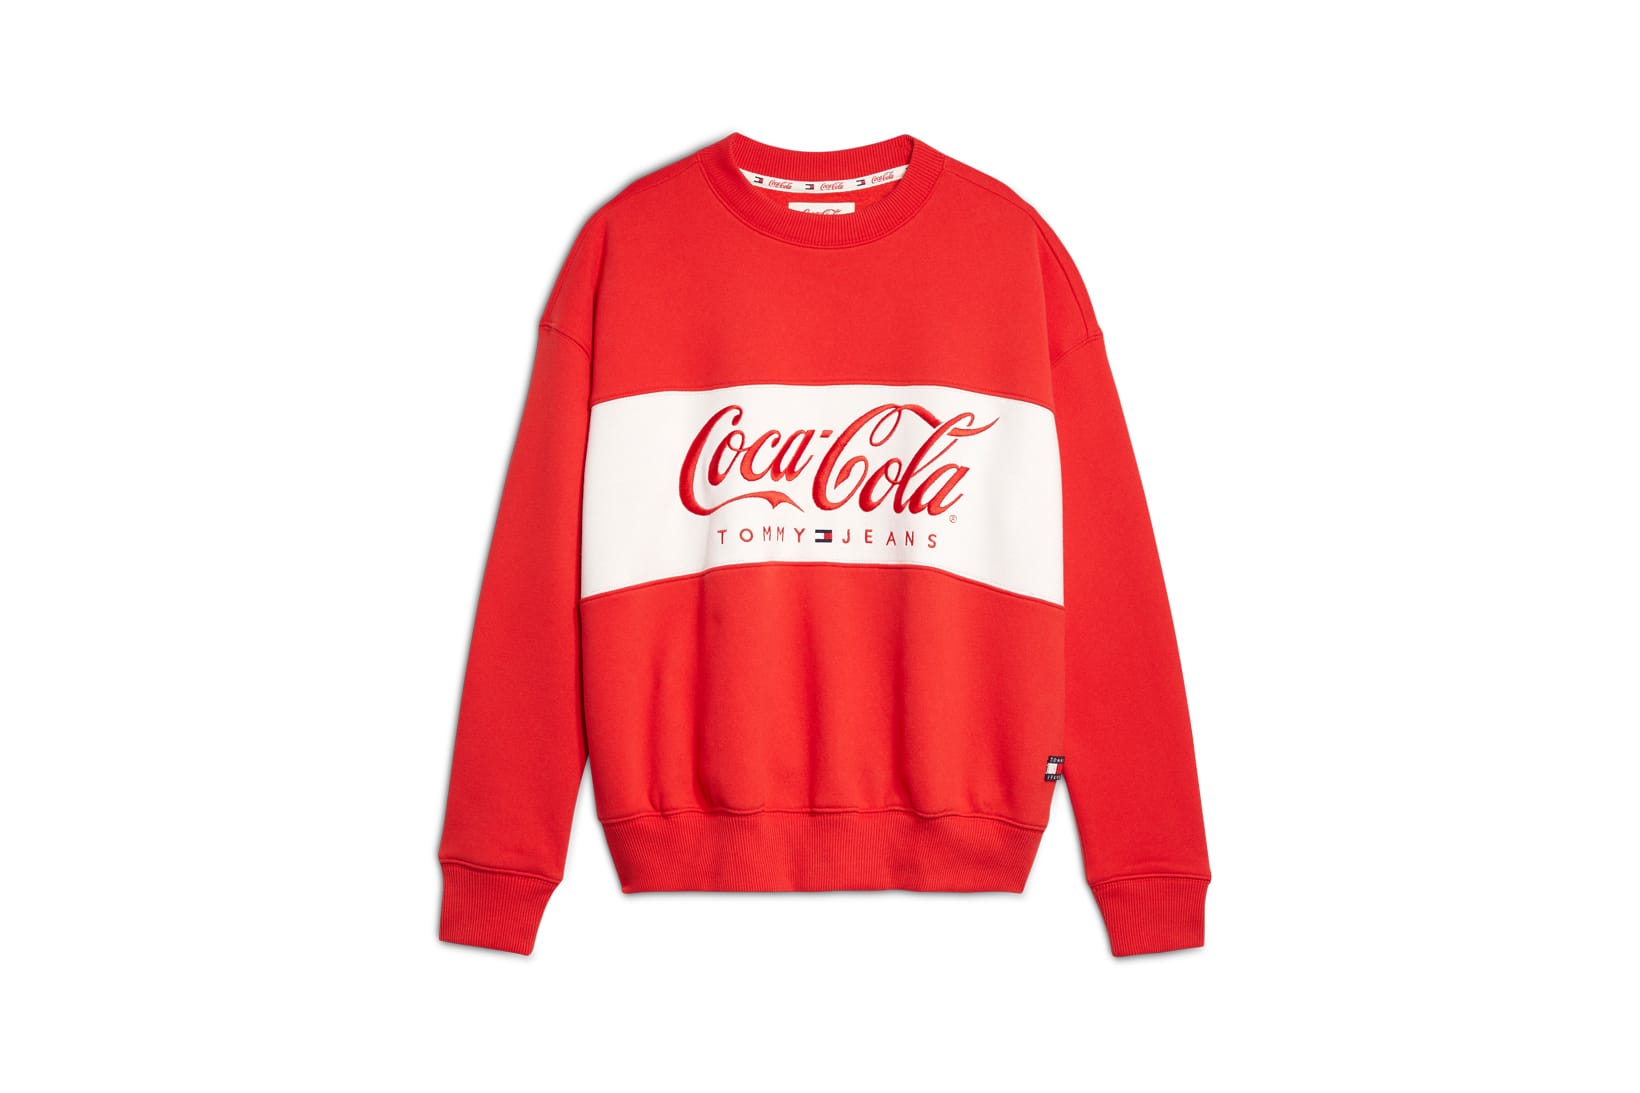 Coca Cola Tommy Hilfiger on Sale, 54% OFF | www.hcb.cat